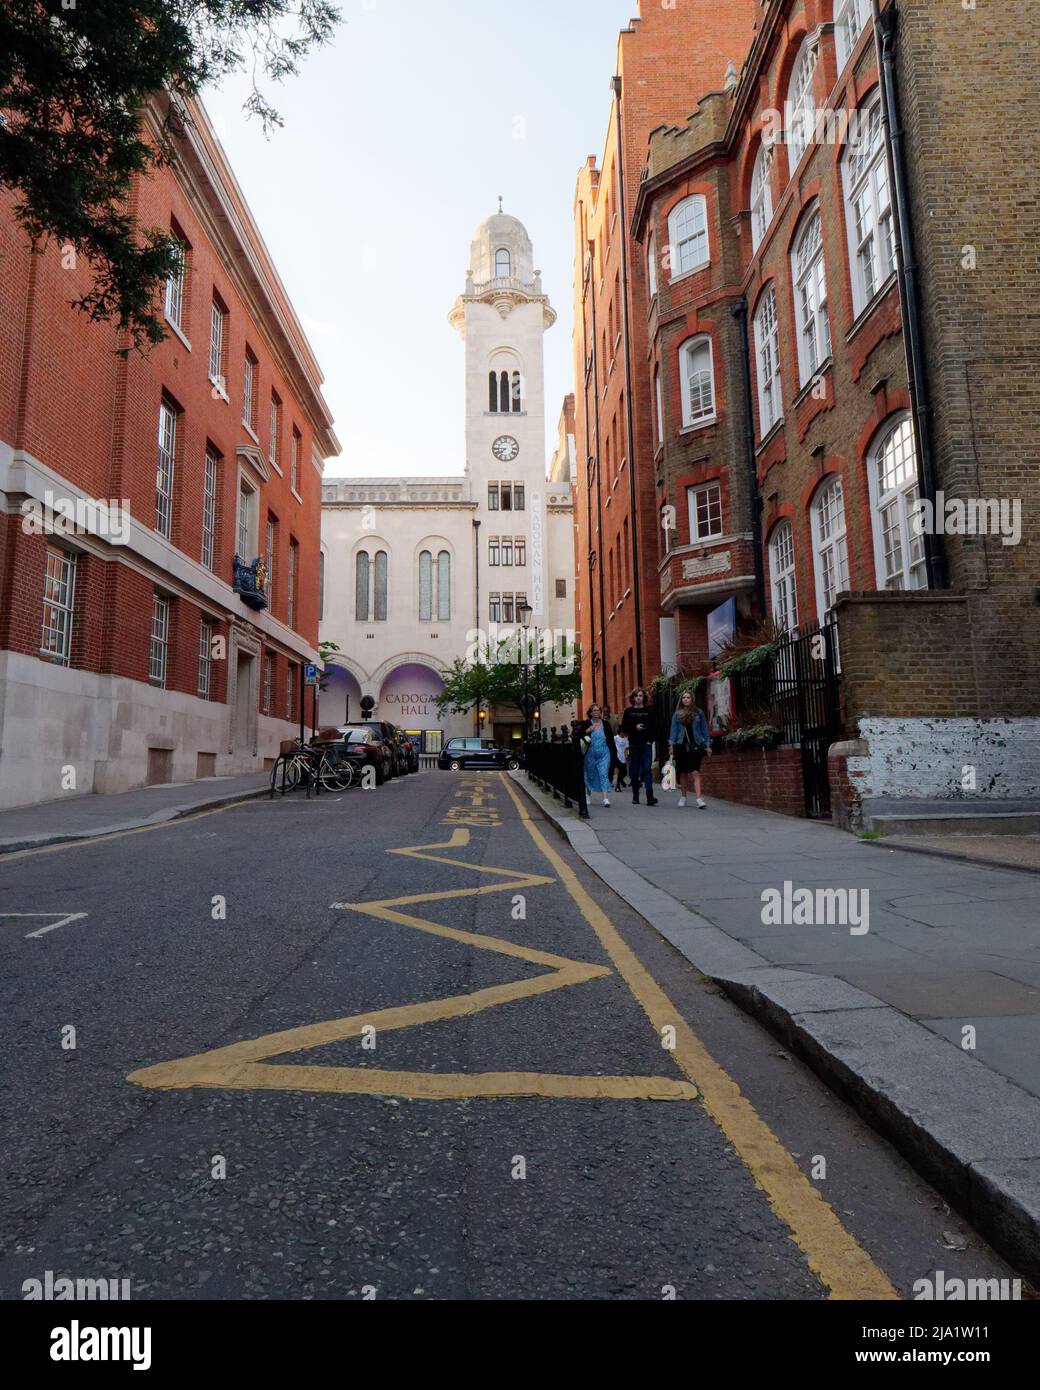 London, Greater London, England, May 14 2022: Cadogan Hall, a concert hall in Sloane Terrace near Sloane Square, Chelsea. Stock Photo